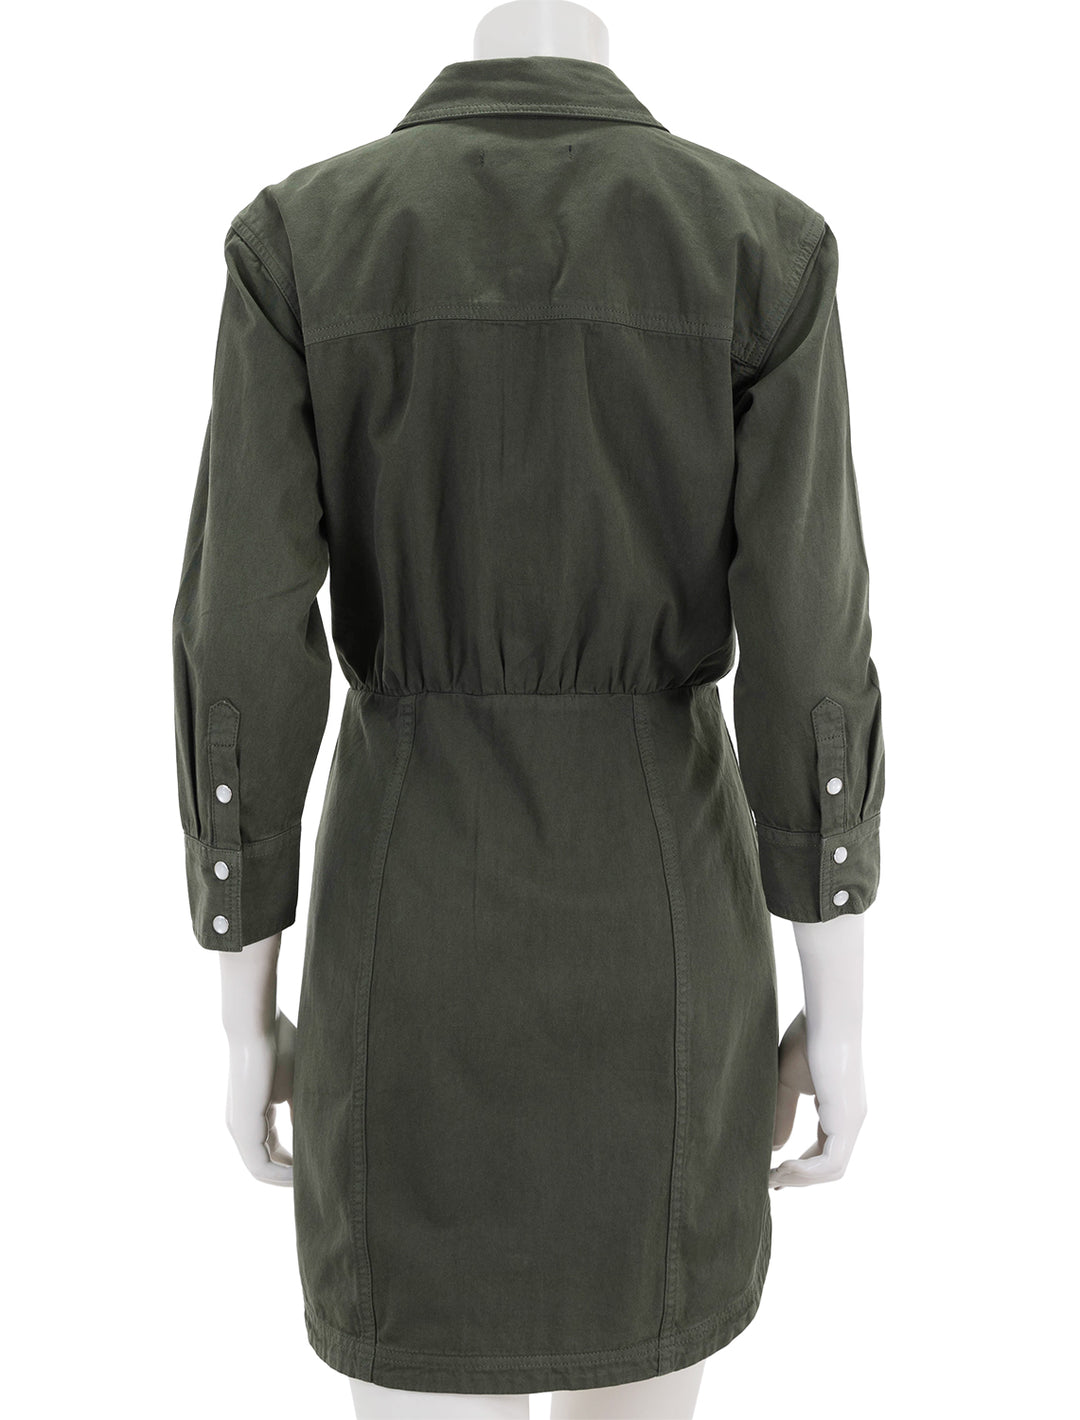 back view of keston dress in army green